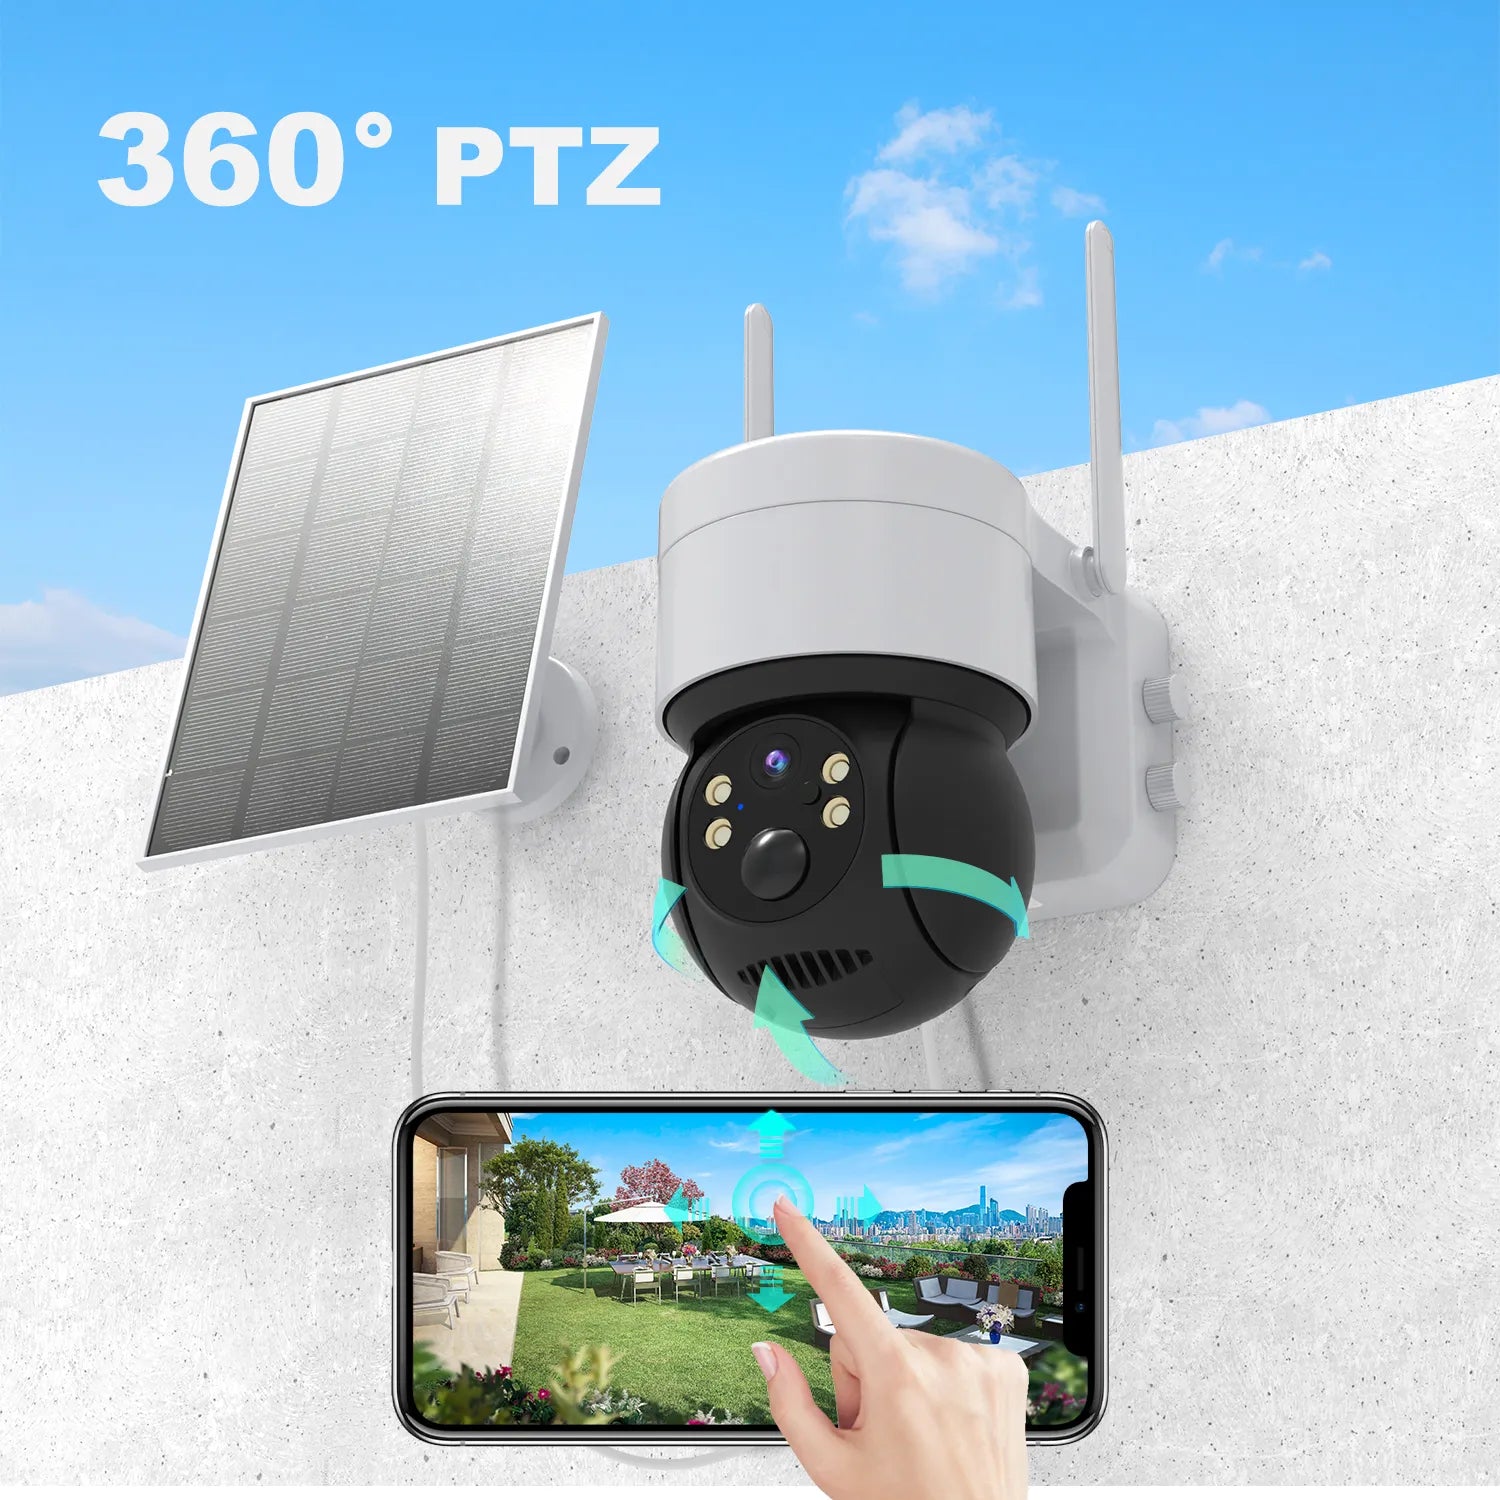 Security Solar Camera Outdoor Wifi - Supersell